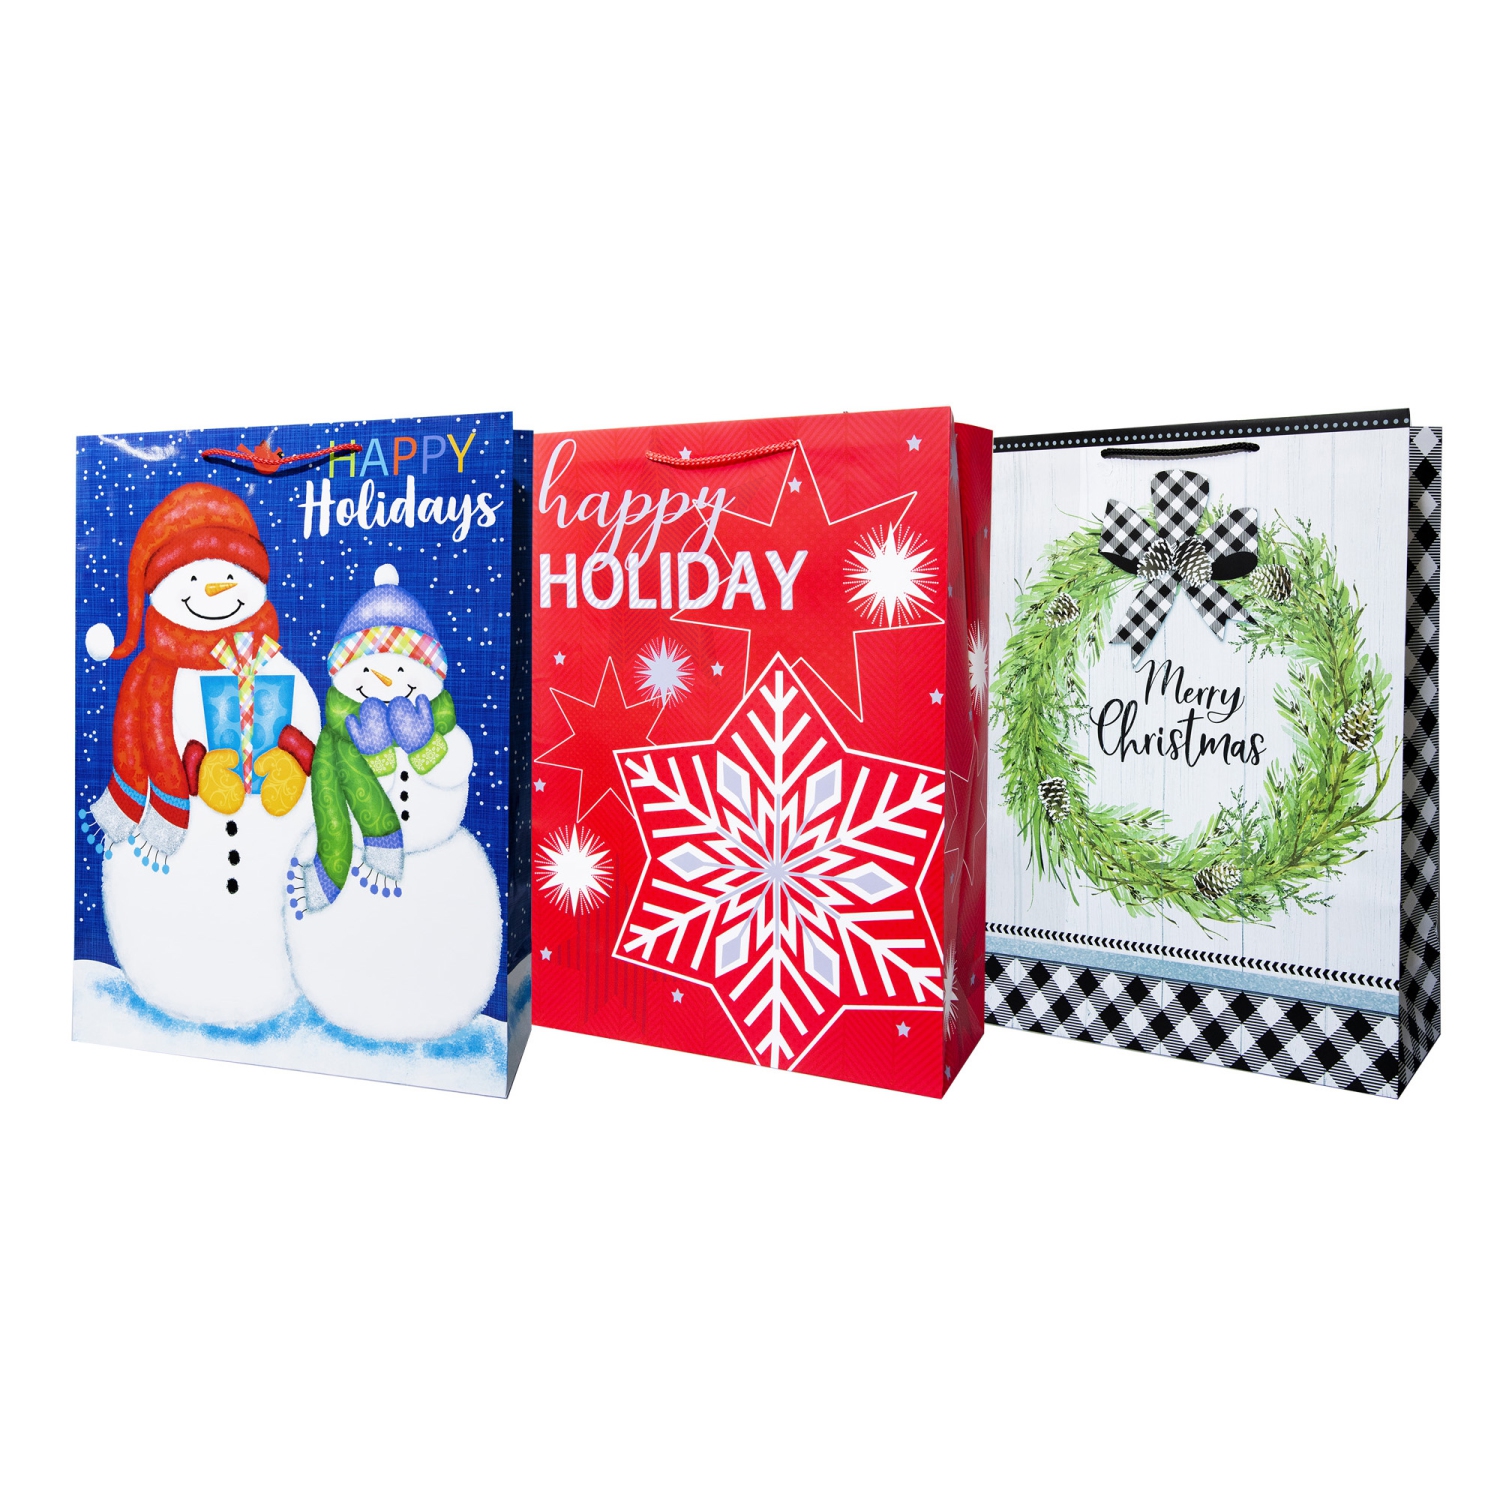 Pack of 3 Assorted Large Christmas Gift Bags with Handle